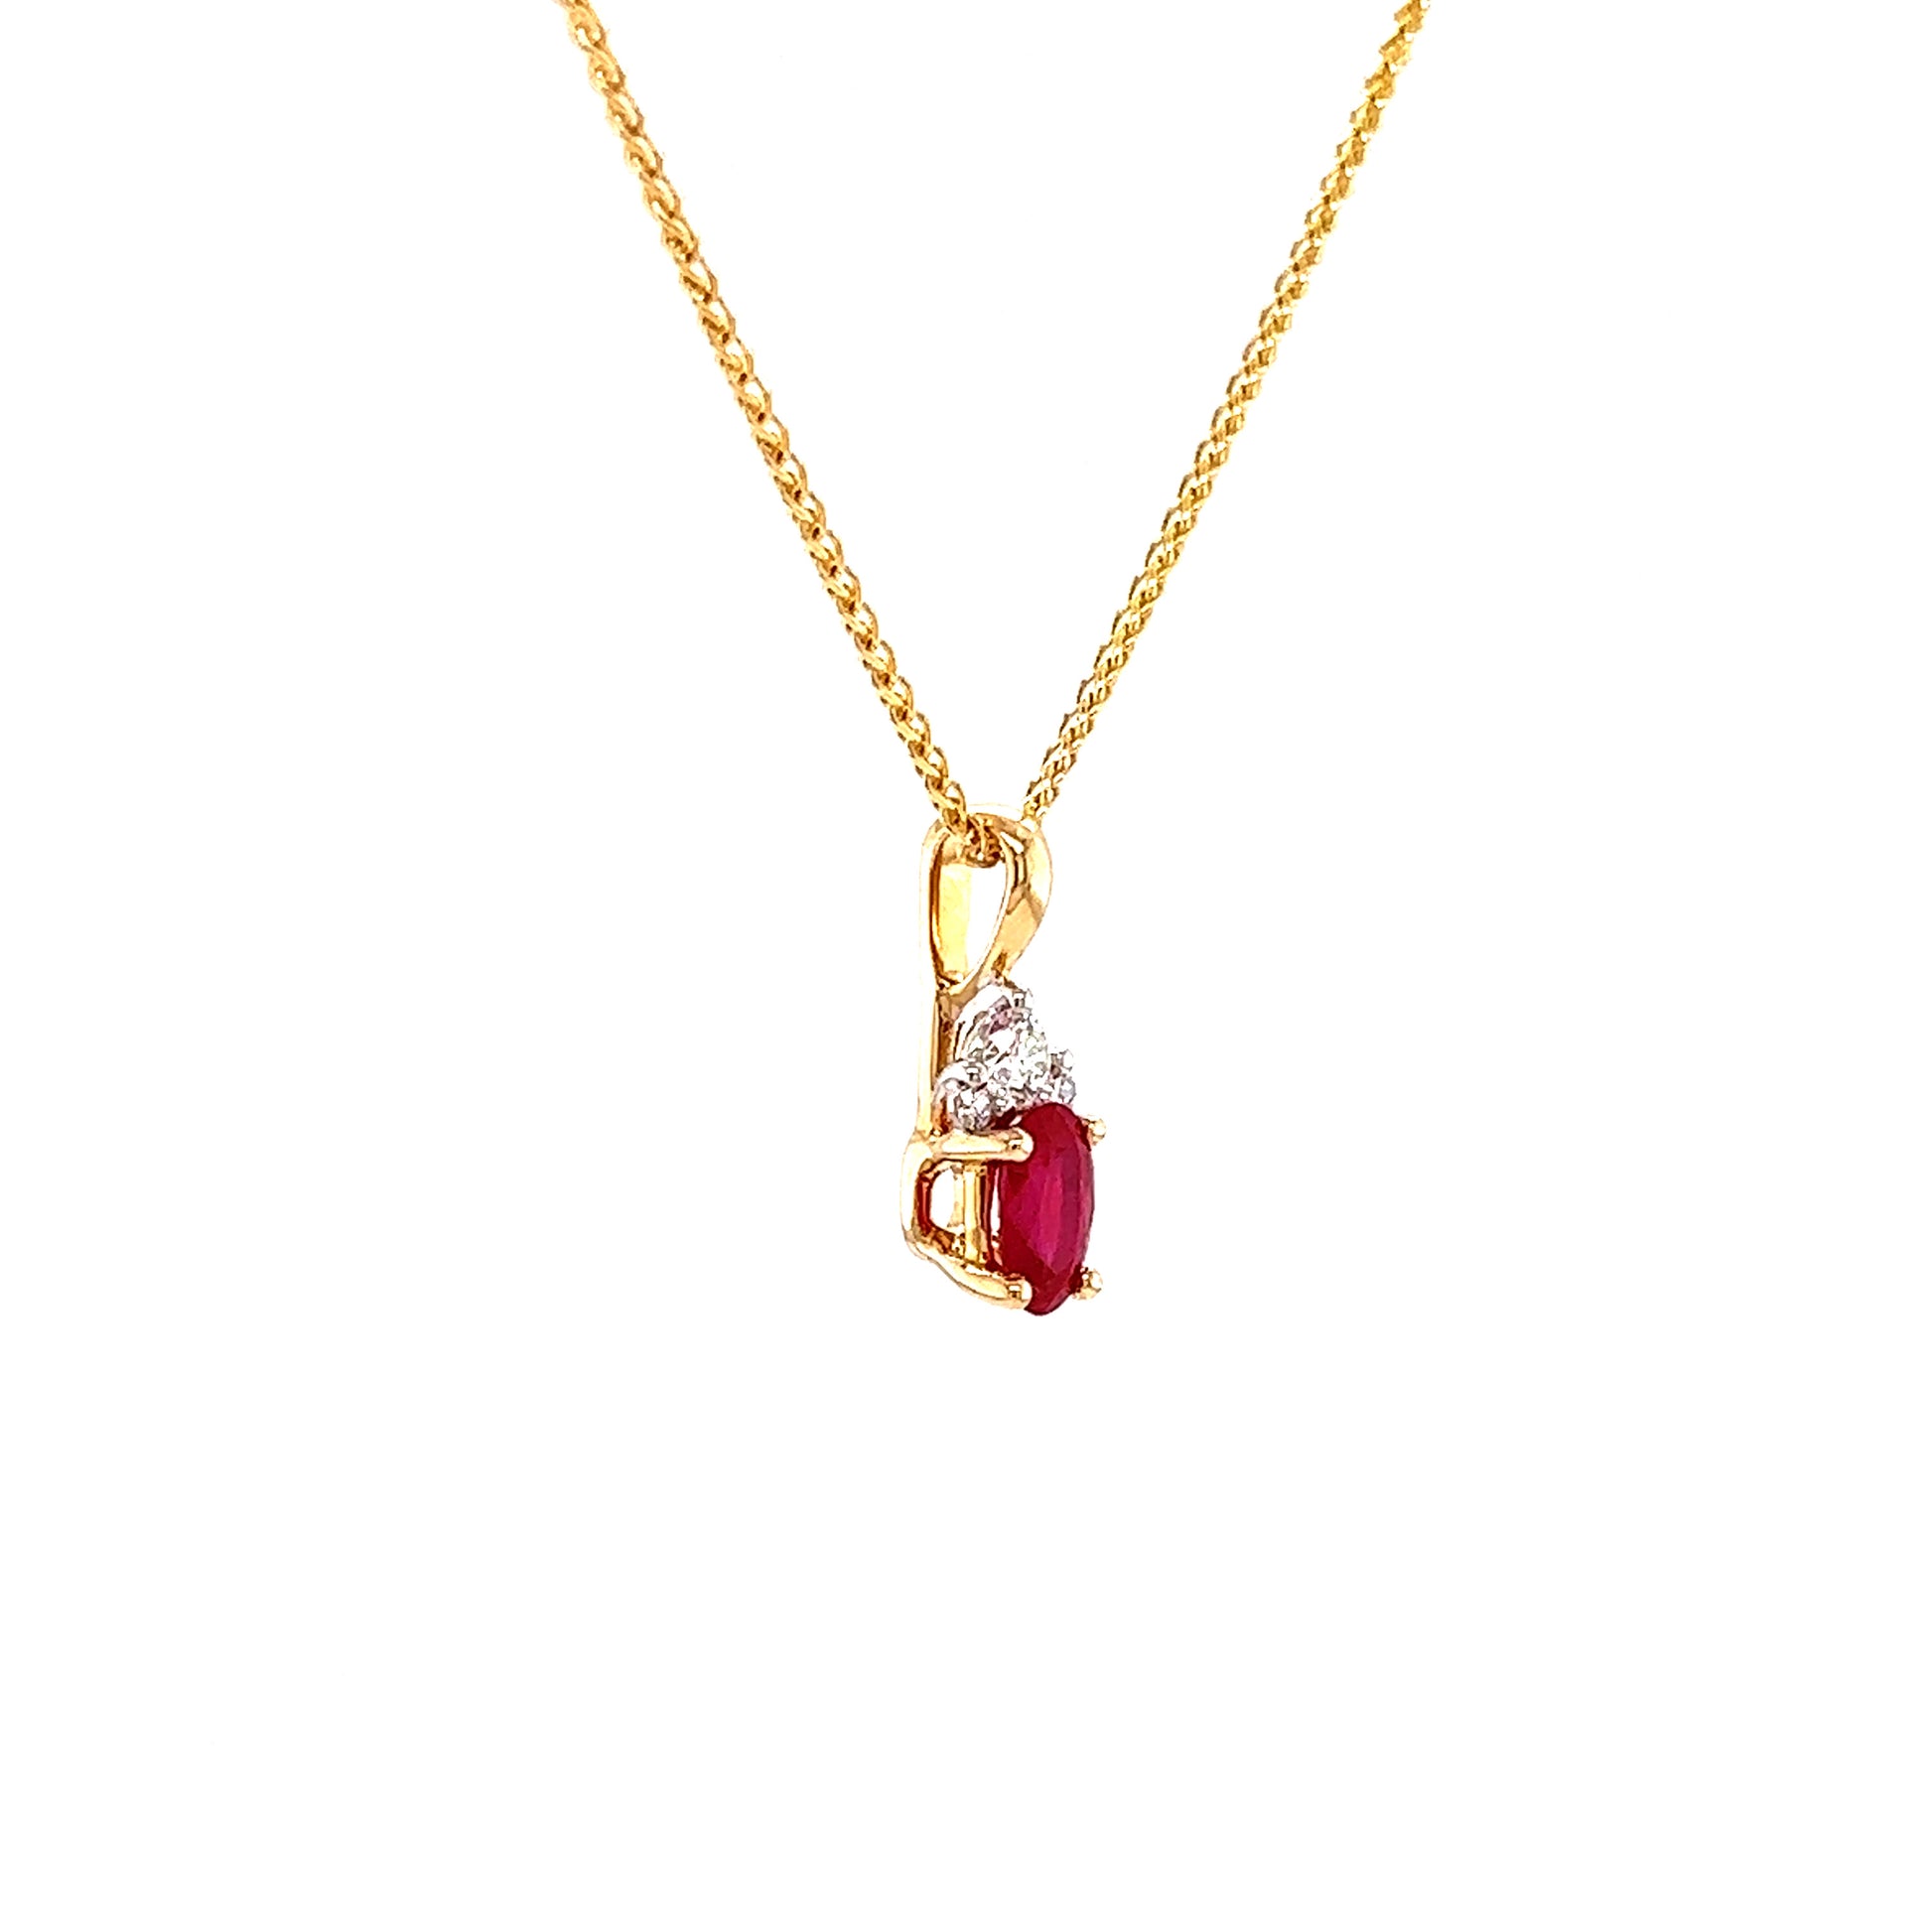 Oval Ruby Pendant with Three Accent Diamonds in 14K Yellow Gold Pendant and Chain Left Side View